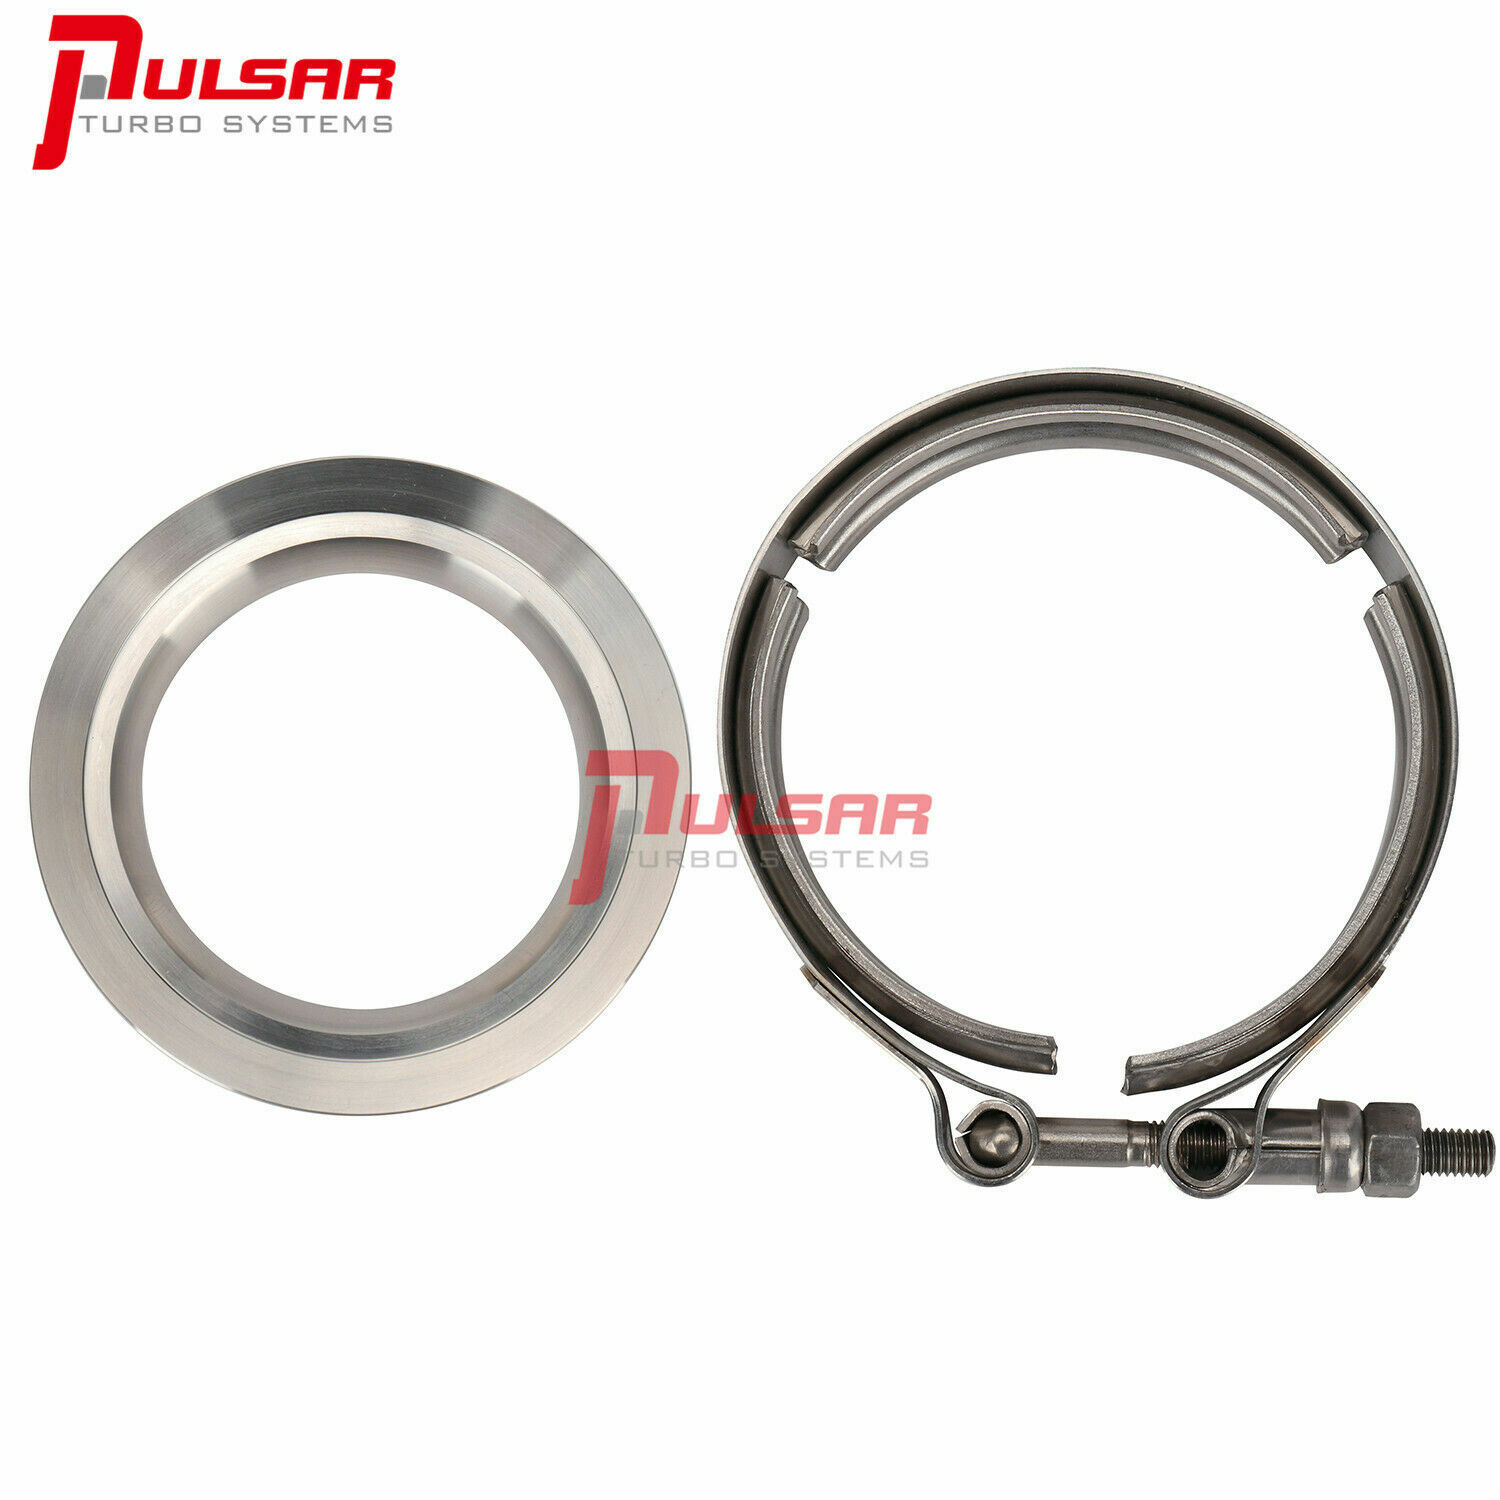 PULSAR S300 T4 Turbo 3″ Stainless Steel Flange Clamp Kit